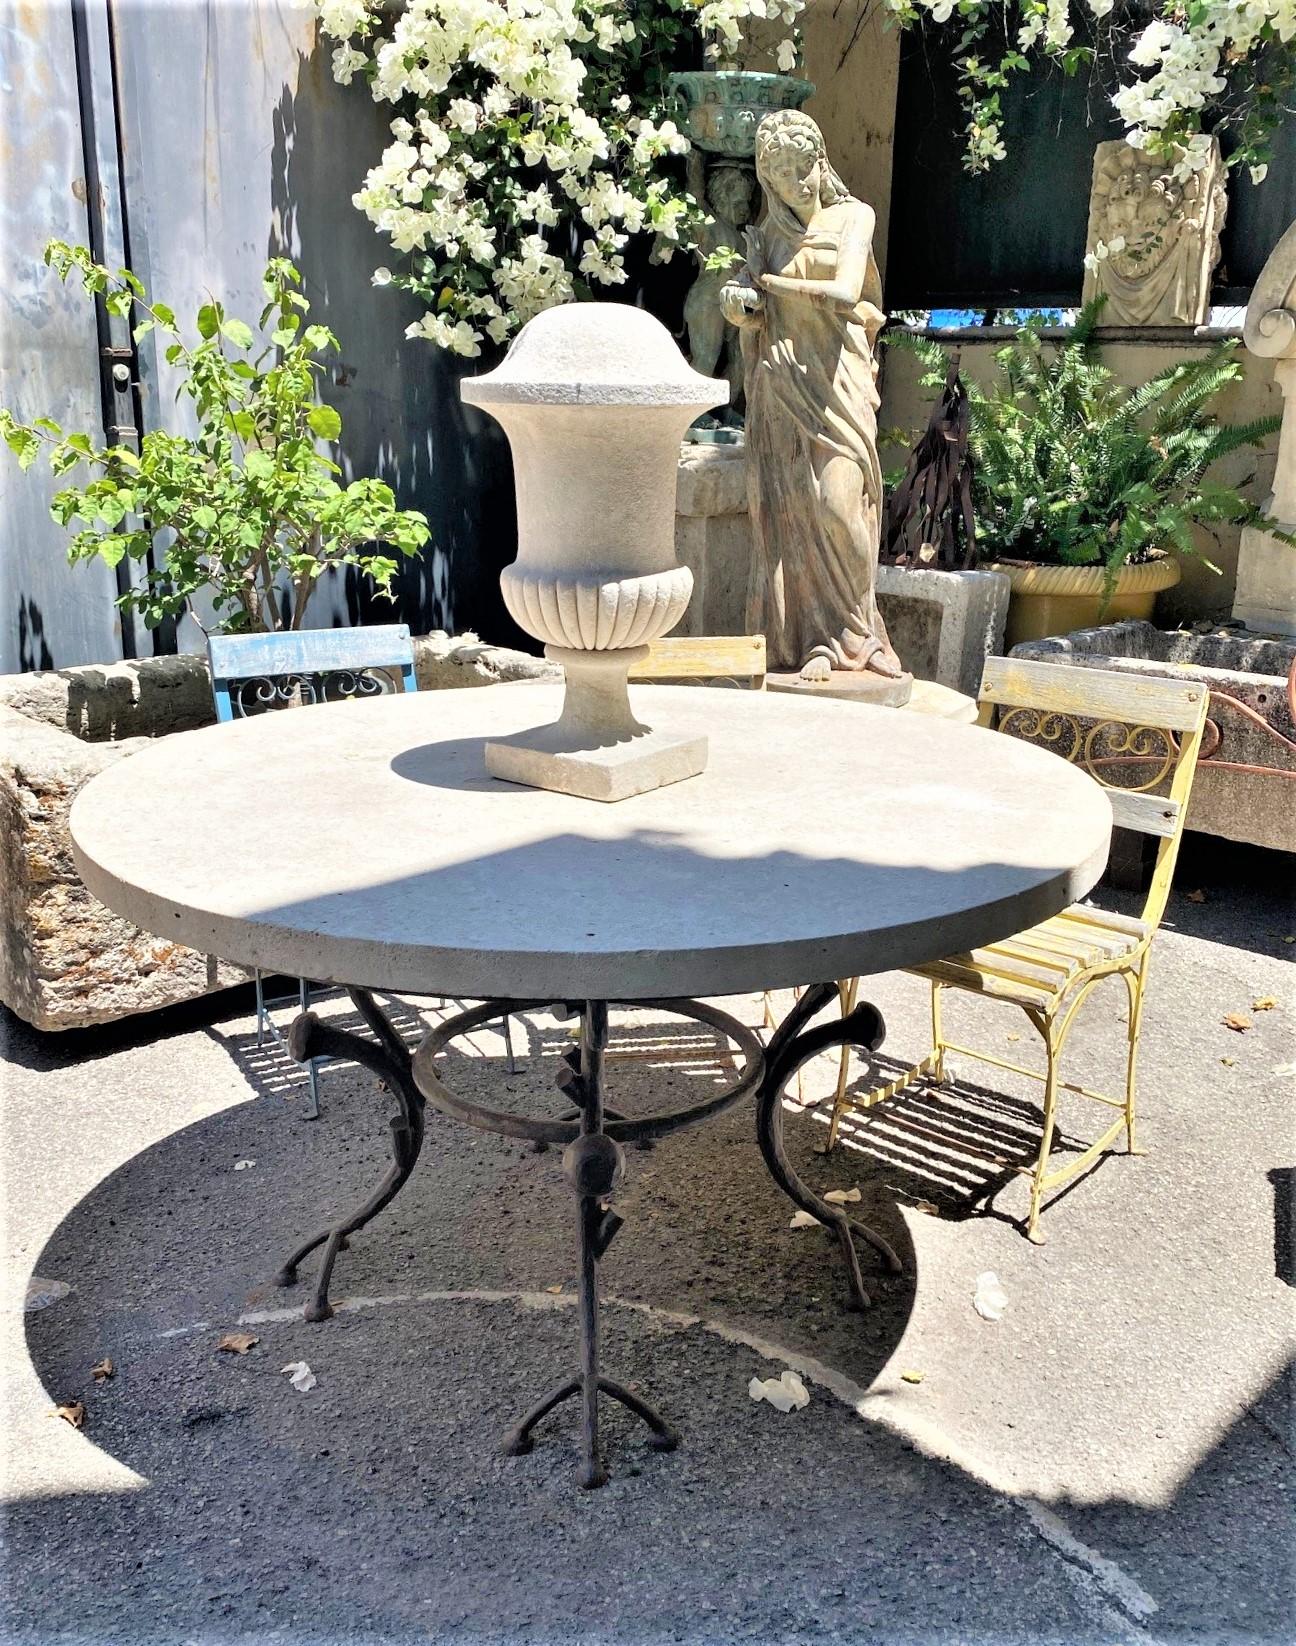 20th Century Large Round Carved Stone & Iron Garden Patio Dining Table Giacometti Style LA CA